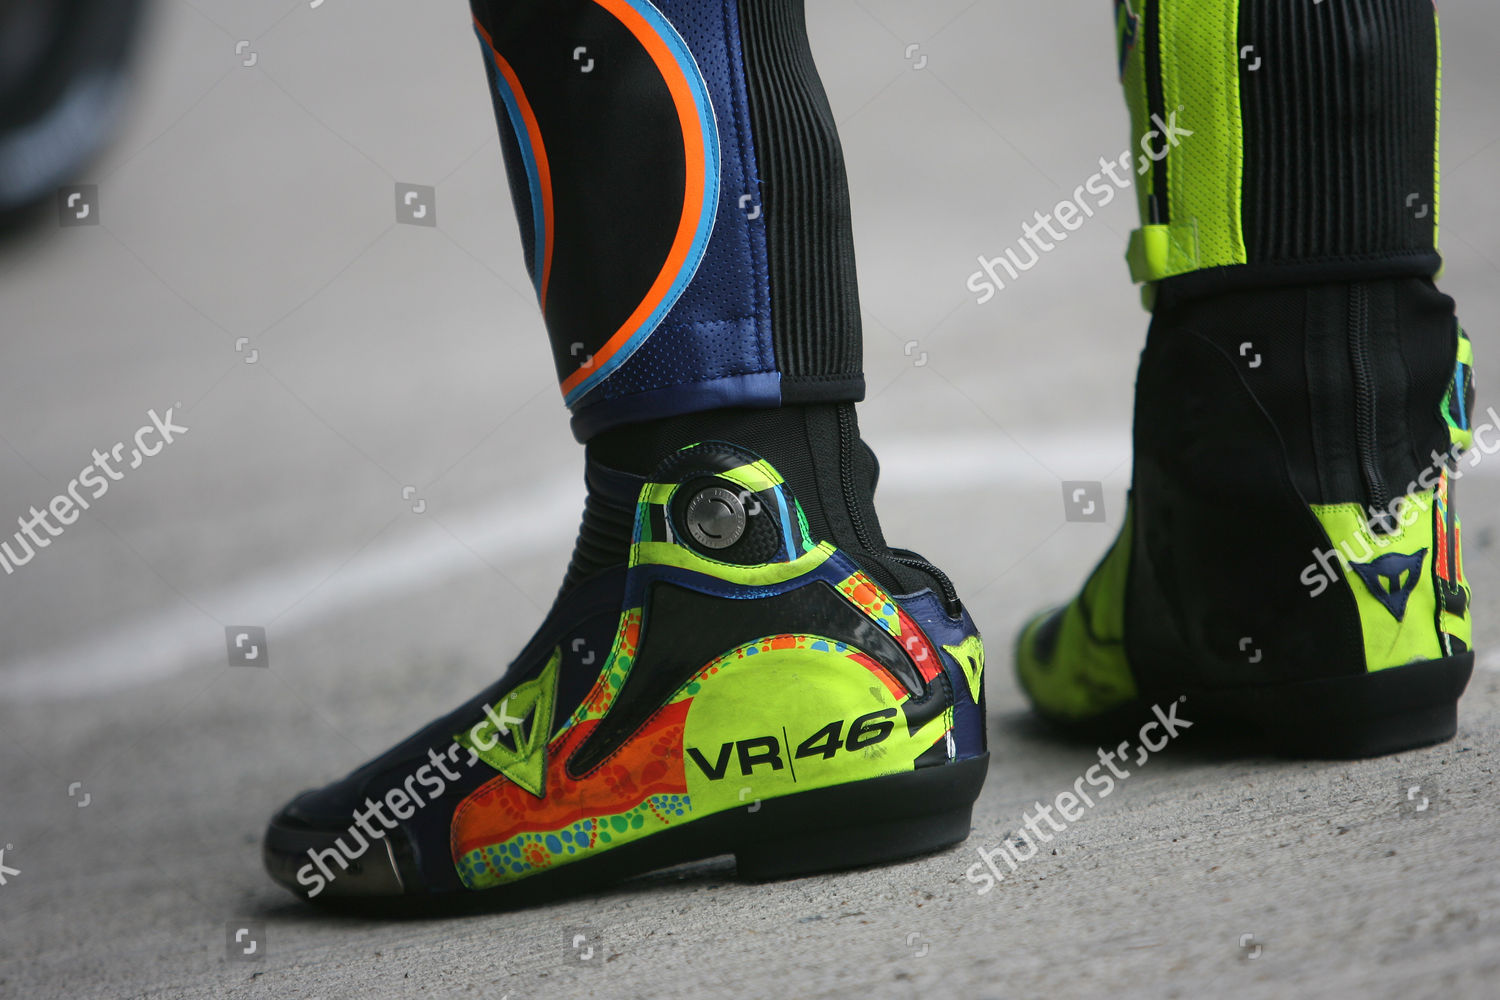 dainese rossi boots